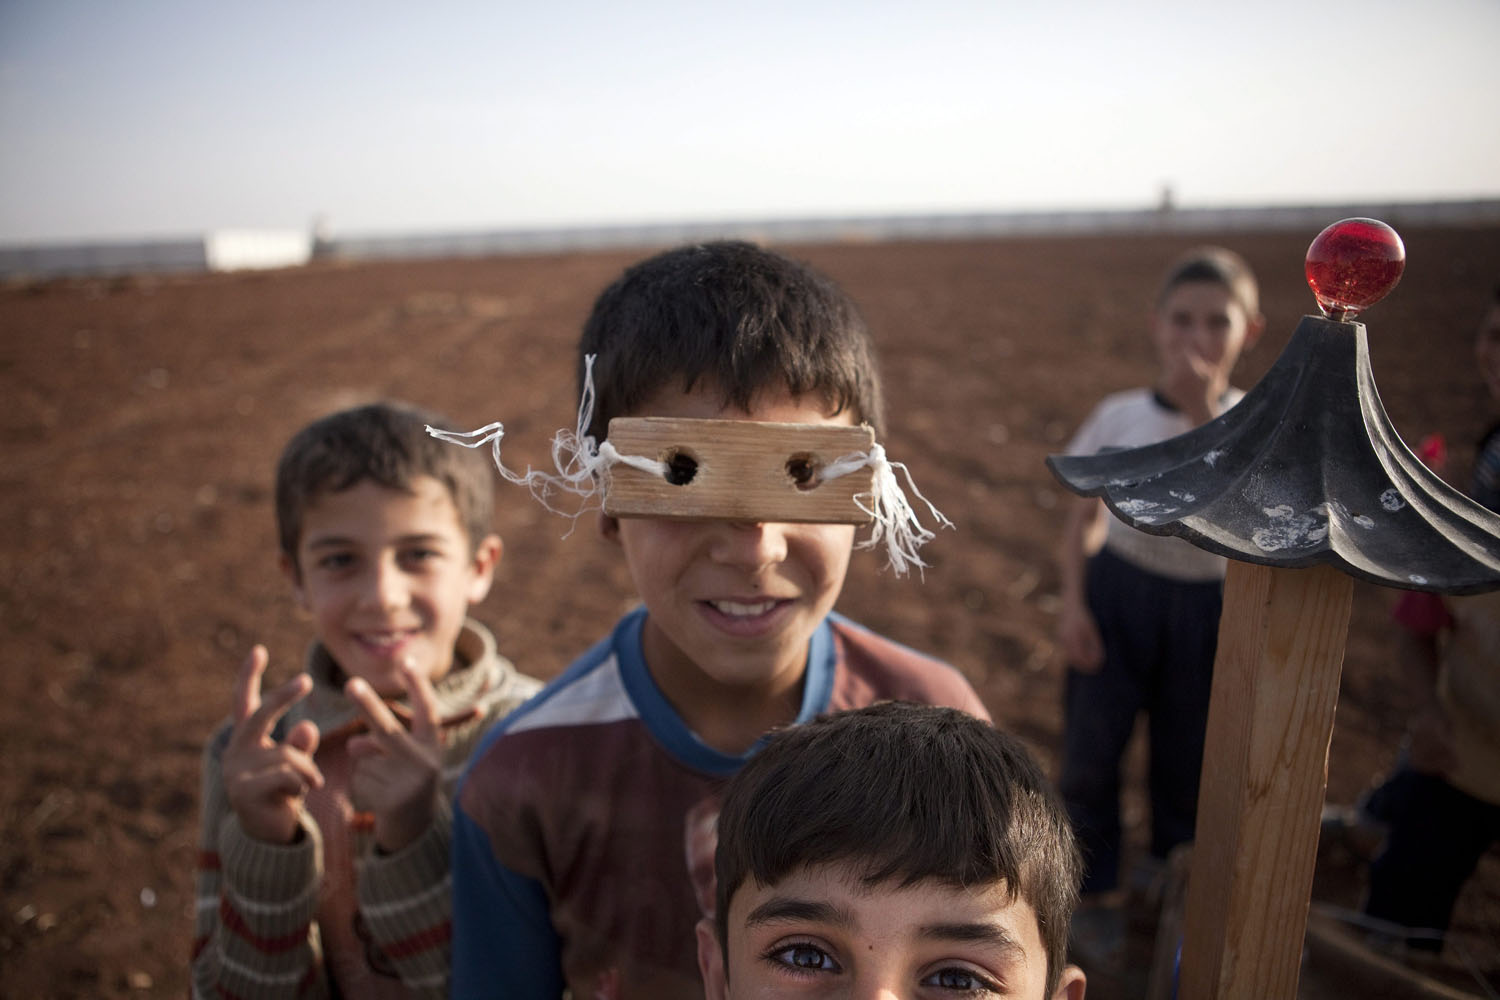 Oct. 7, 2012. Syrian refugee children play with materials they find, such as a piece of wood turned into glasses, in a camp at the Syrian-Turkish border near Azaz, Syria. The makeshift refugee camp is reported to be growing daily.